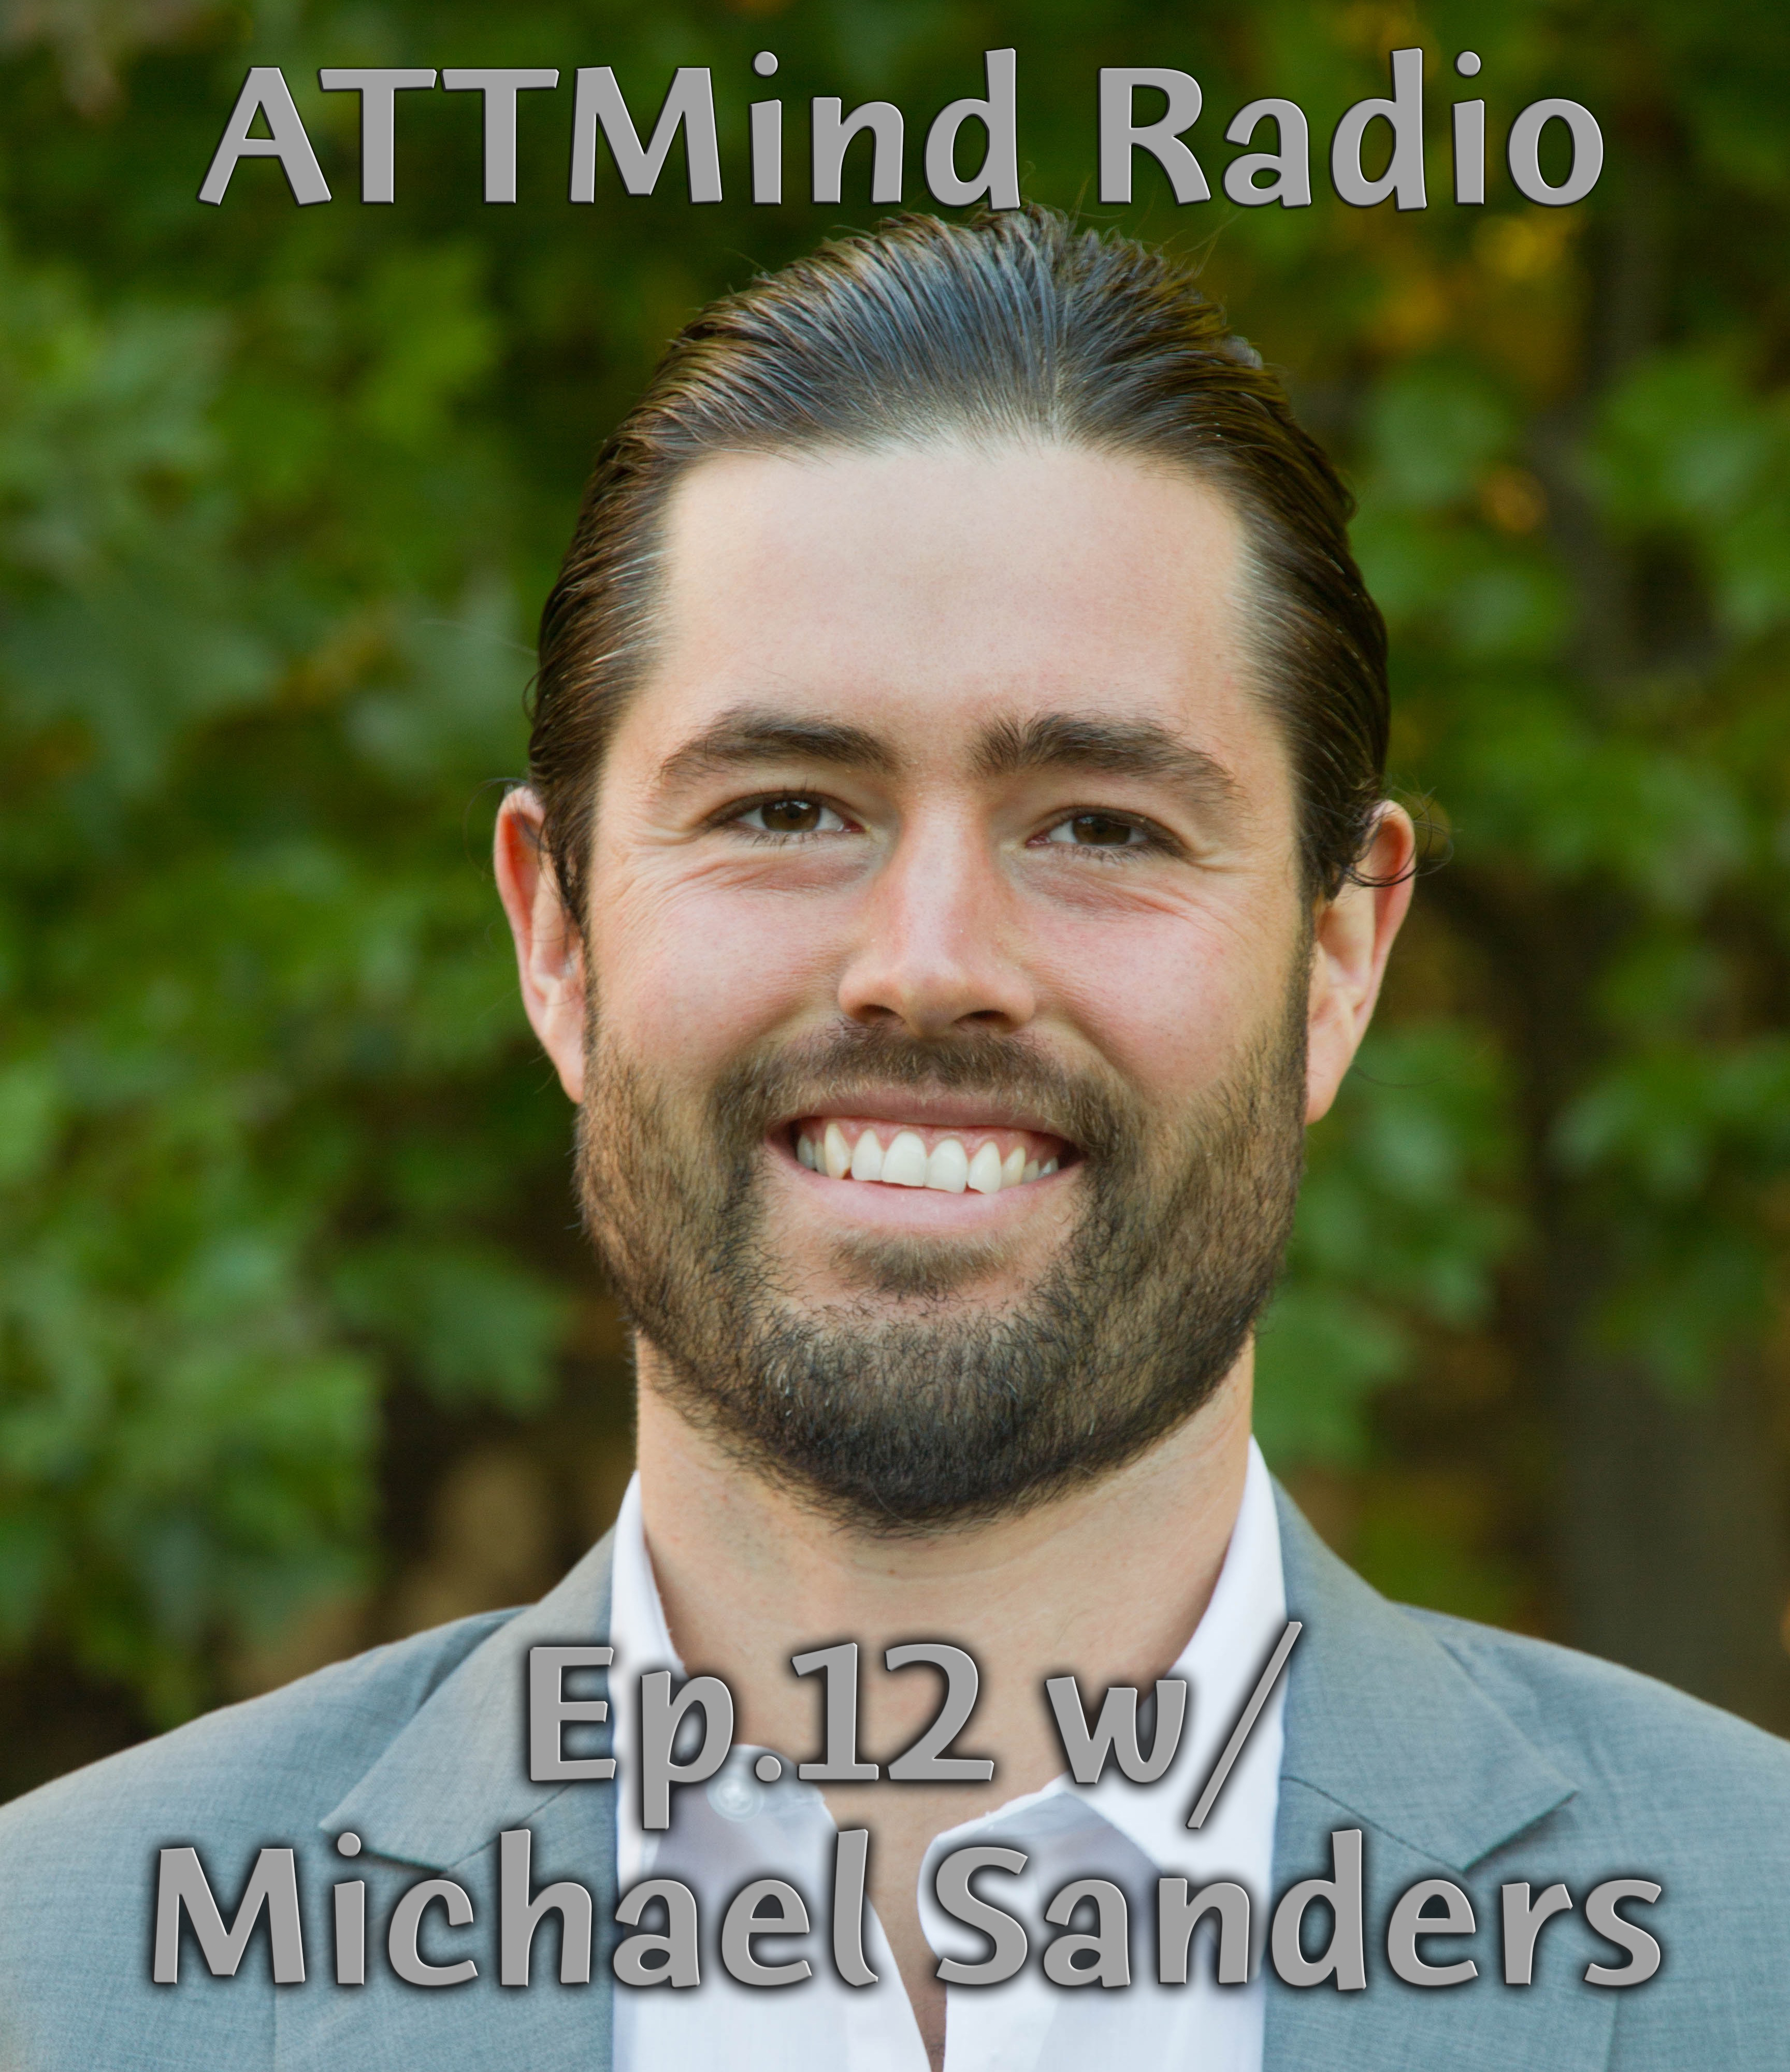 ... Michael Sanders travels us through his transformational experiences drinking Ayahuasca in Jungles of Peru. In an engaging narrative, Michael takes us in ... - m-sanders-orginal-headshot-new-promo-radio-photo